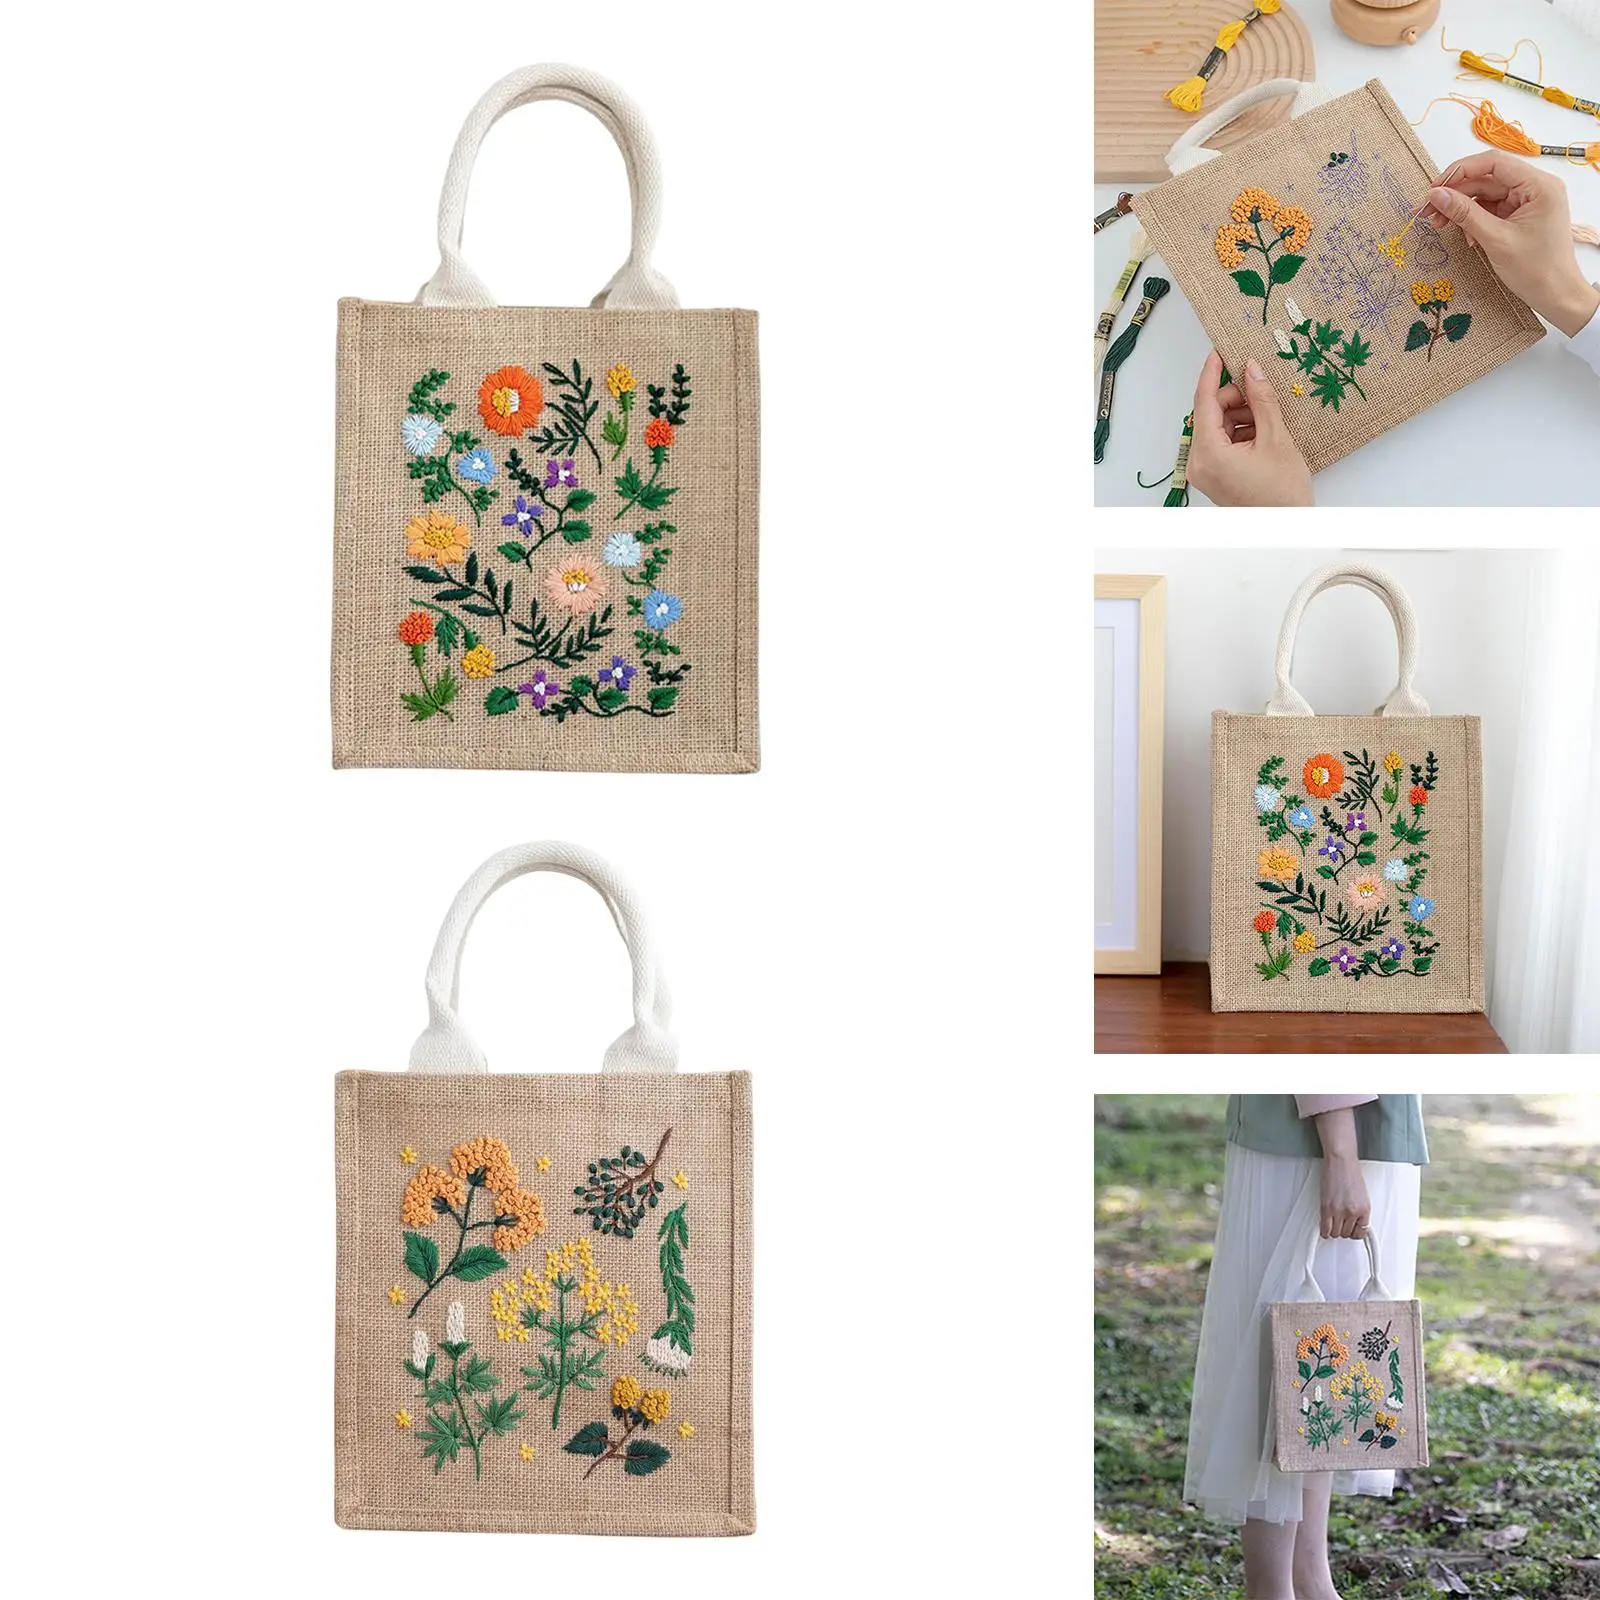 Embroidery Bag with Supplies Girls Gift Cross Stitch Kits Handmade Organizer Bag Handbag Making Crafts Embroidery Kit for Adults